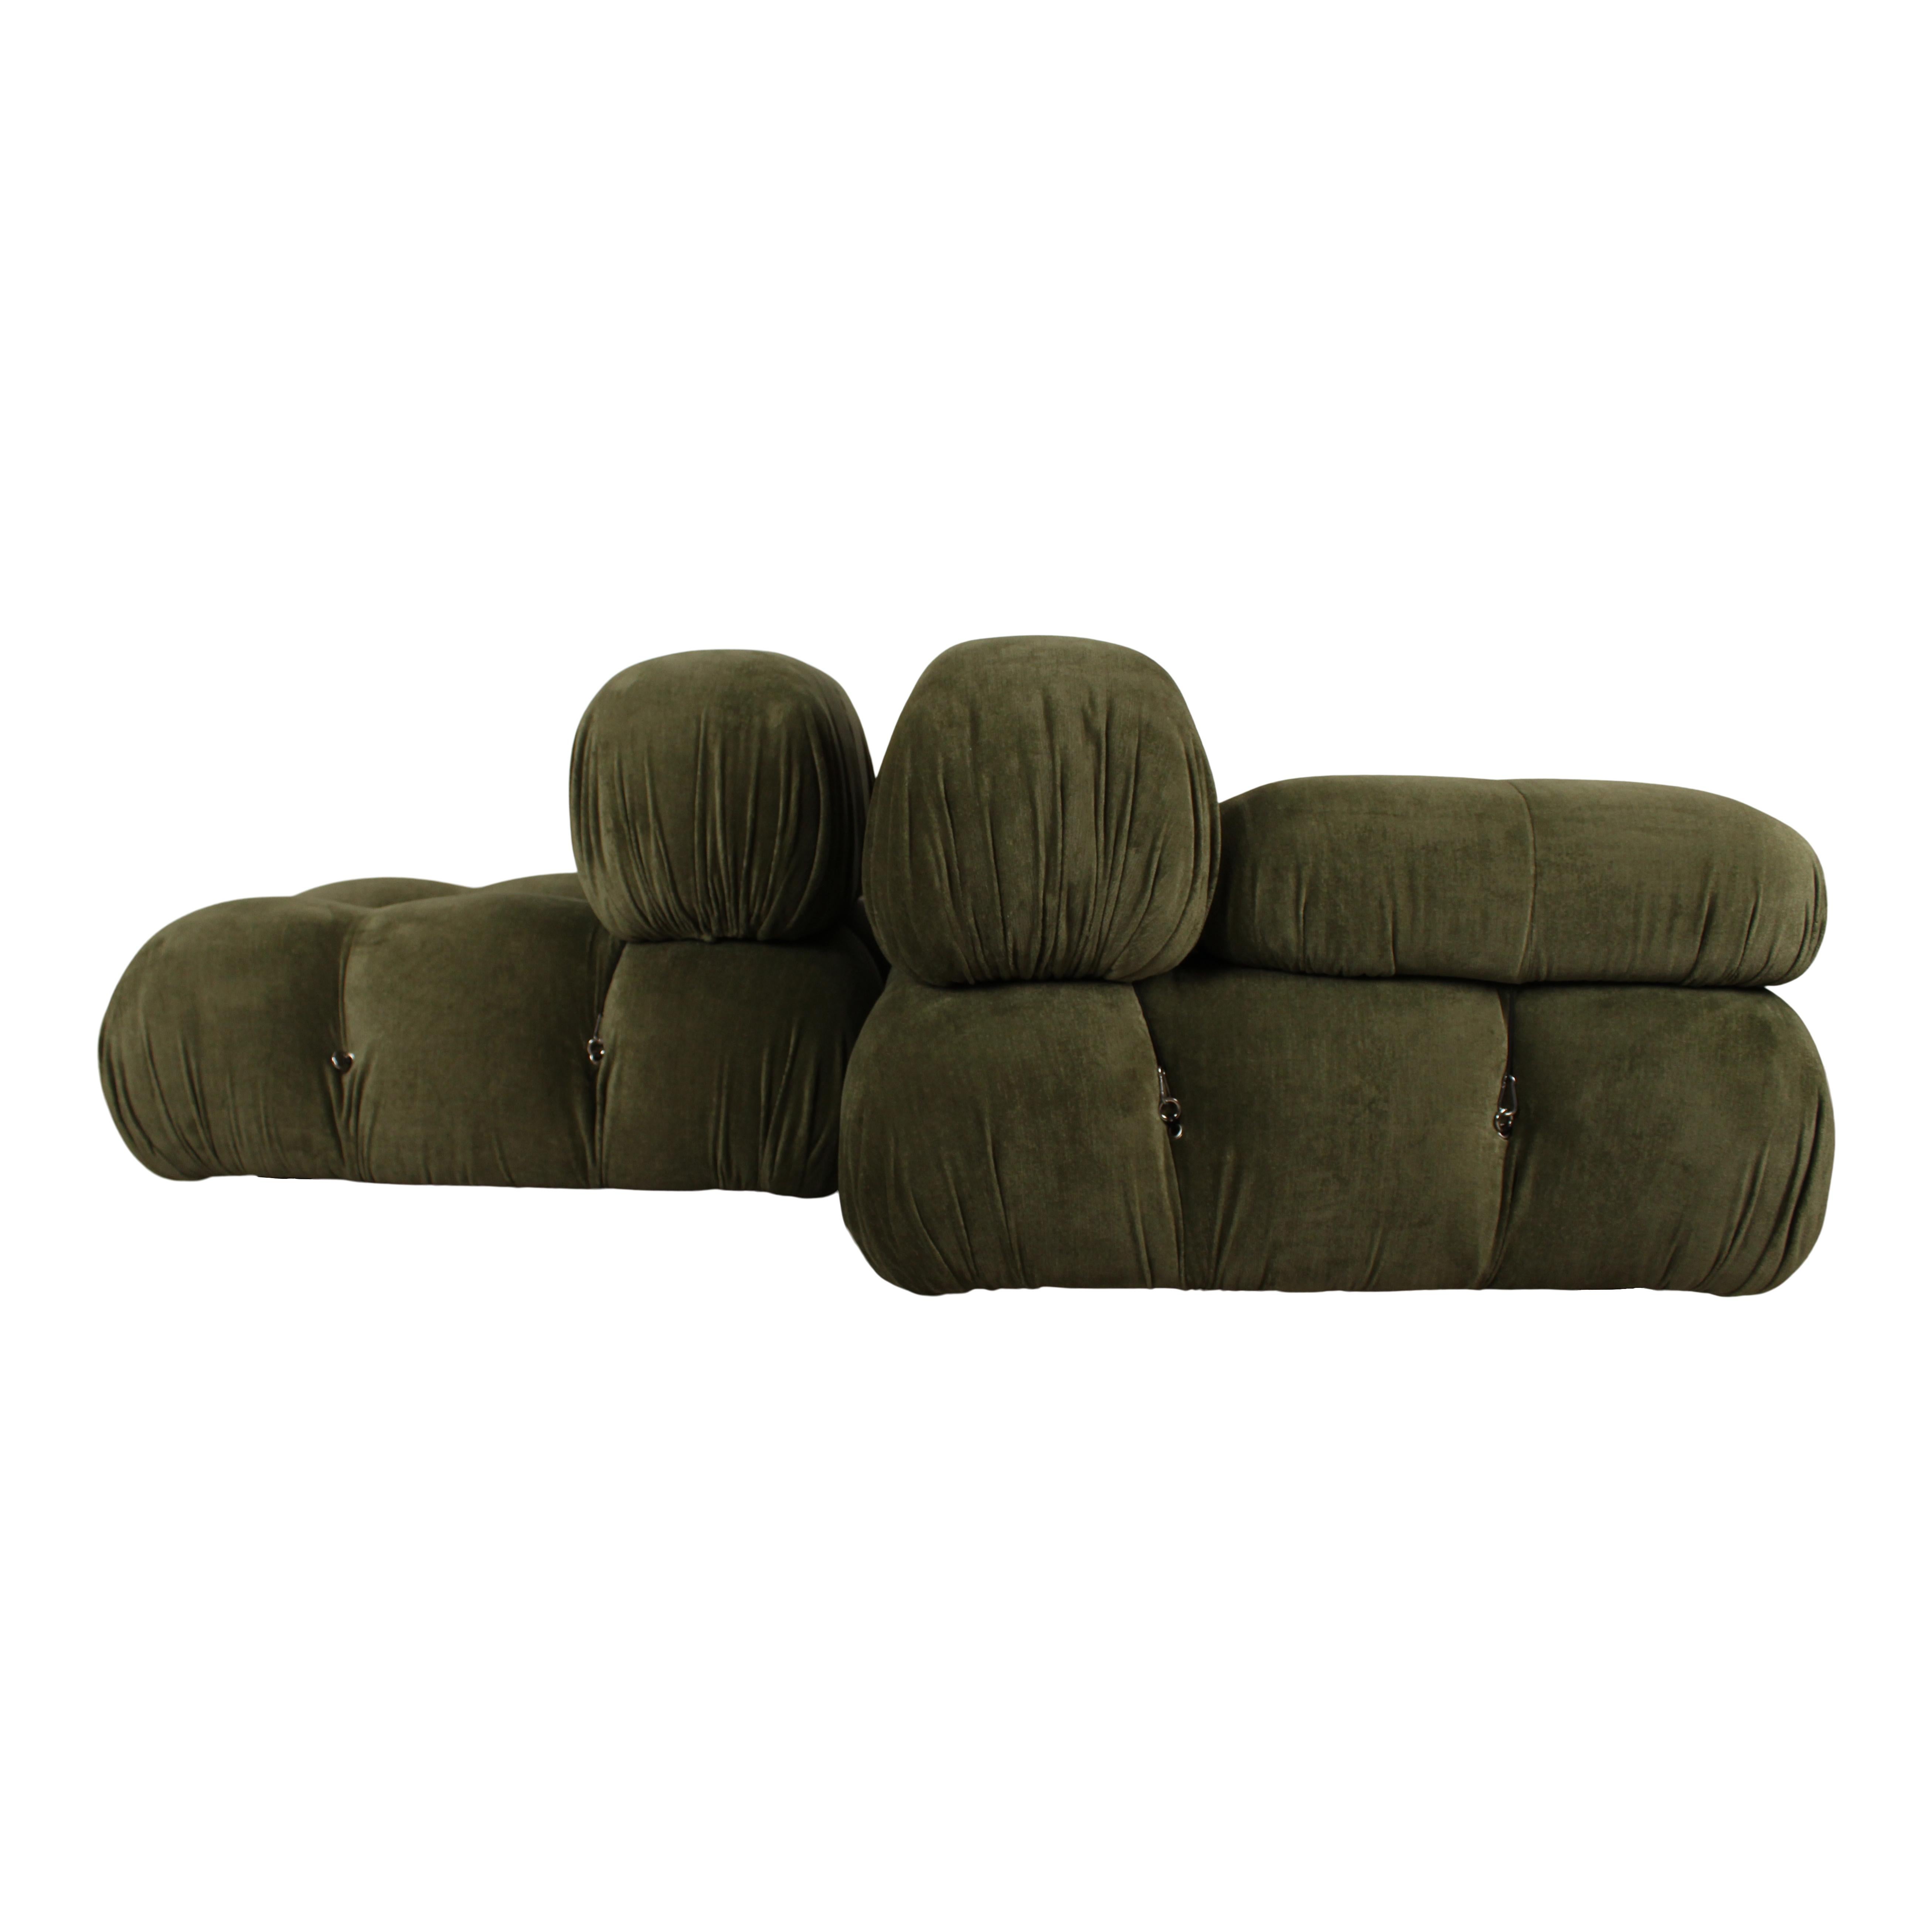 Camaleonda sofa, designed by Mario Bellini and manufactured by B&B Italia in 1972.

The set features two modules with backrest, and one armrest.

Green Italian linen velvet upholstery.

Fully restored in Italy.

The sofa is very comfortable,